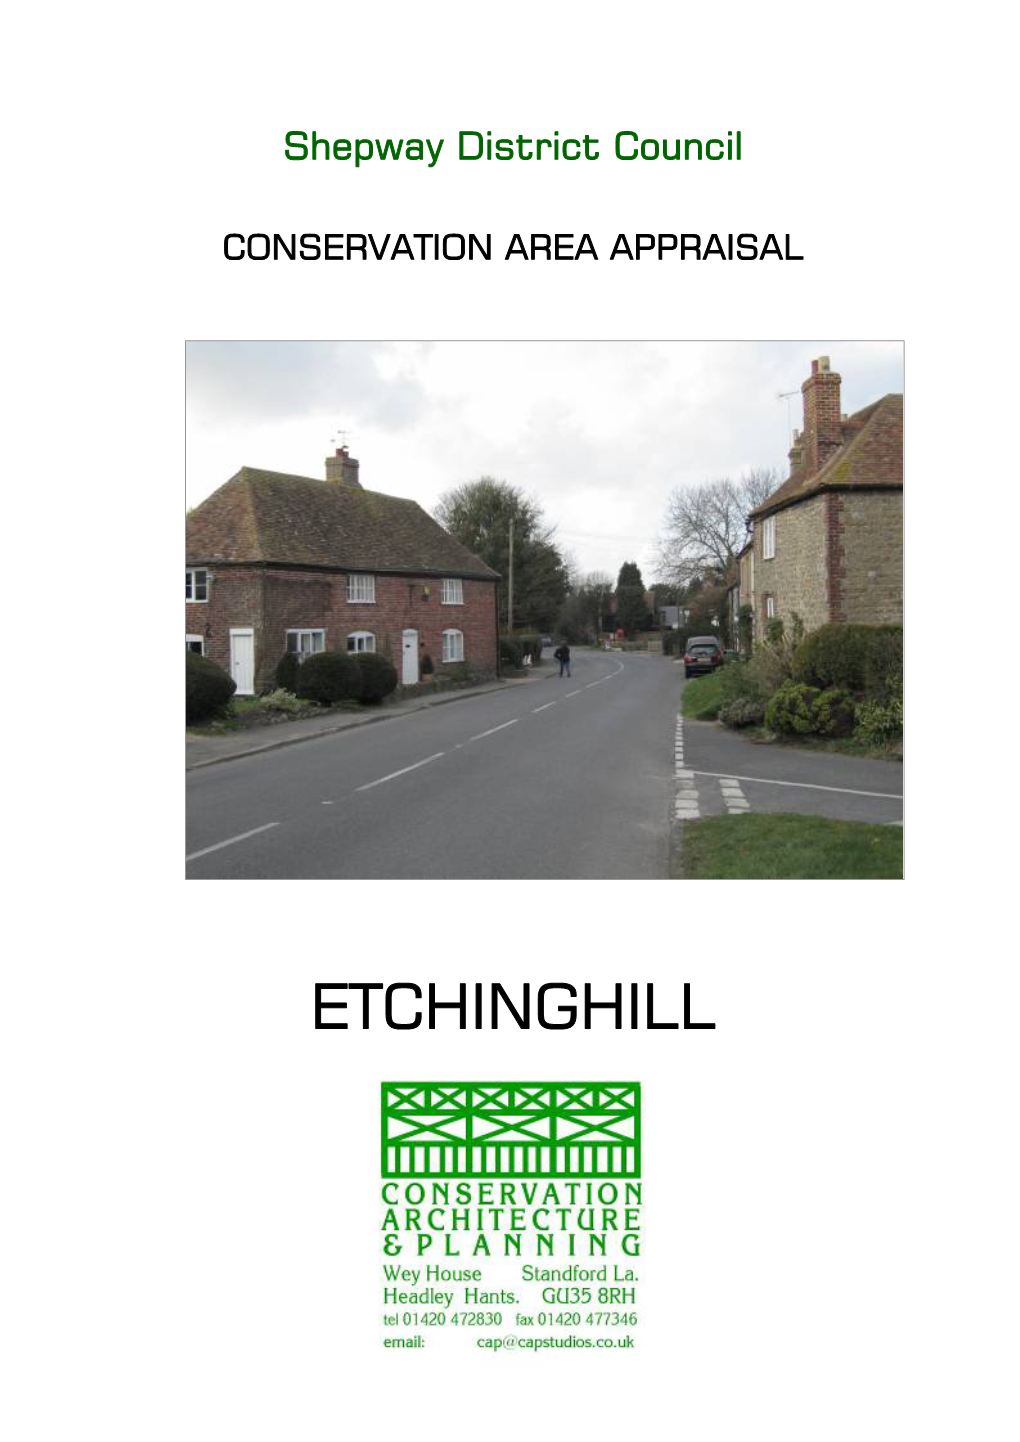 Etchinghill Conservation Area Appraisal